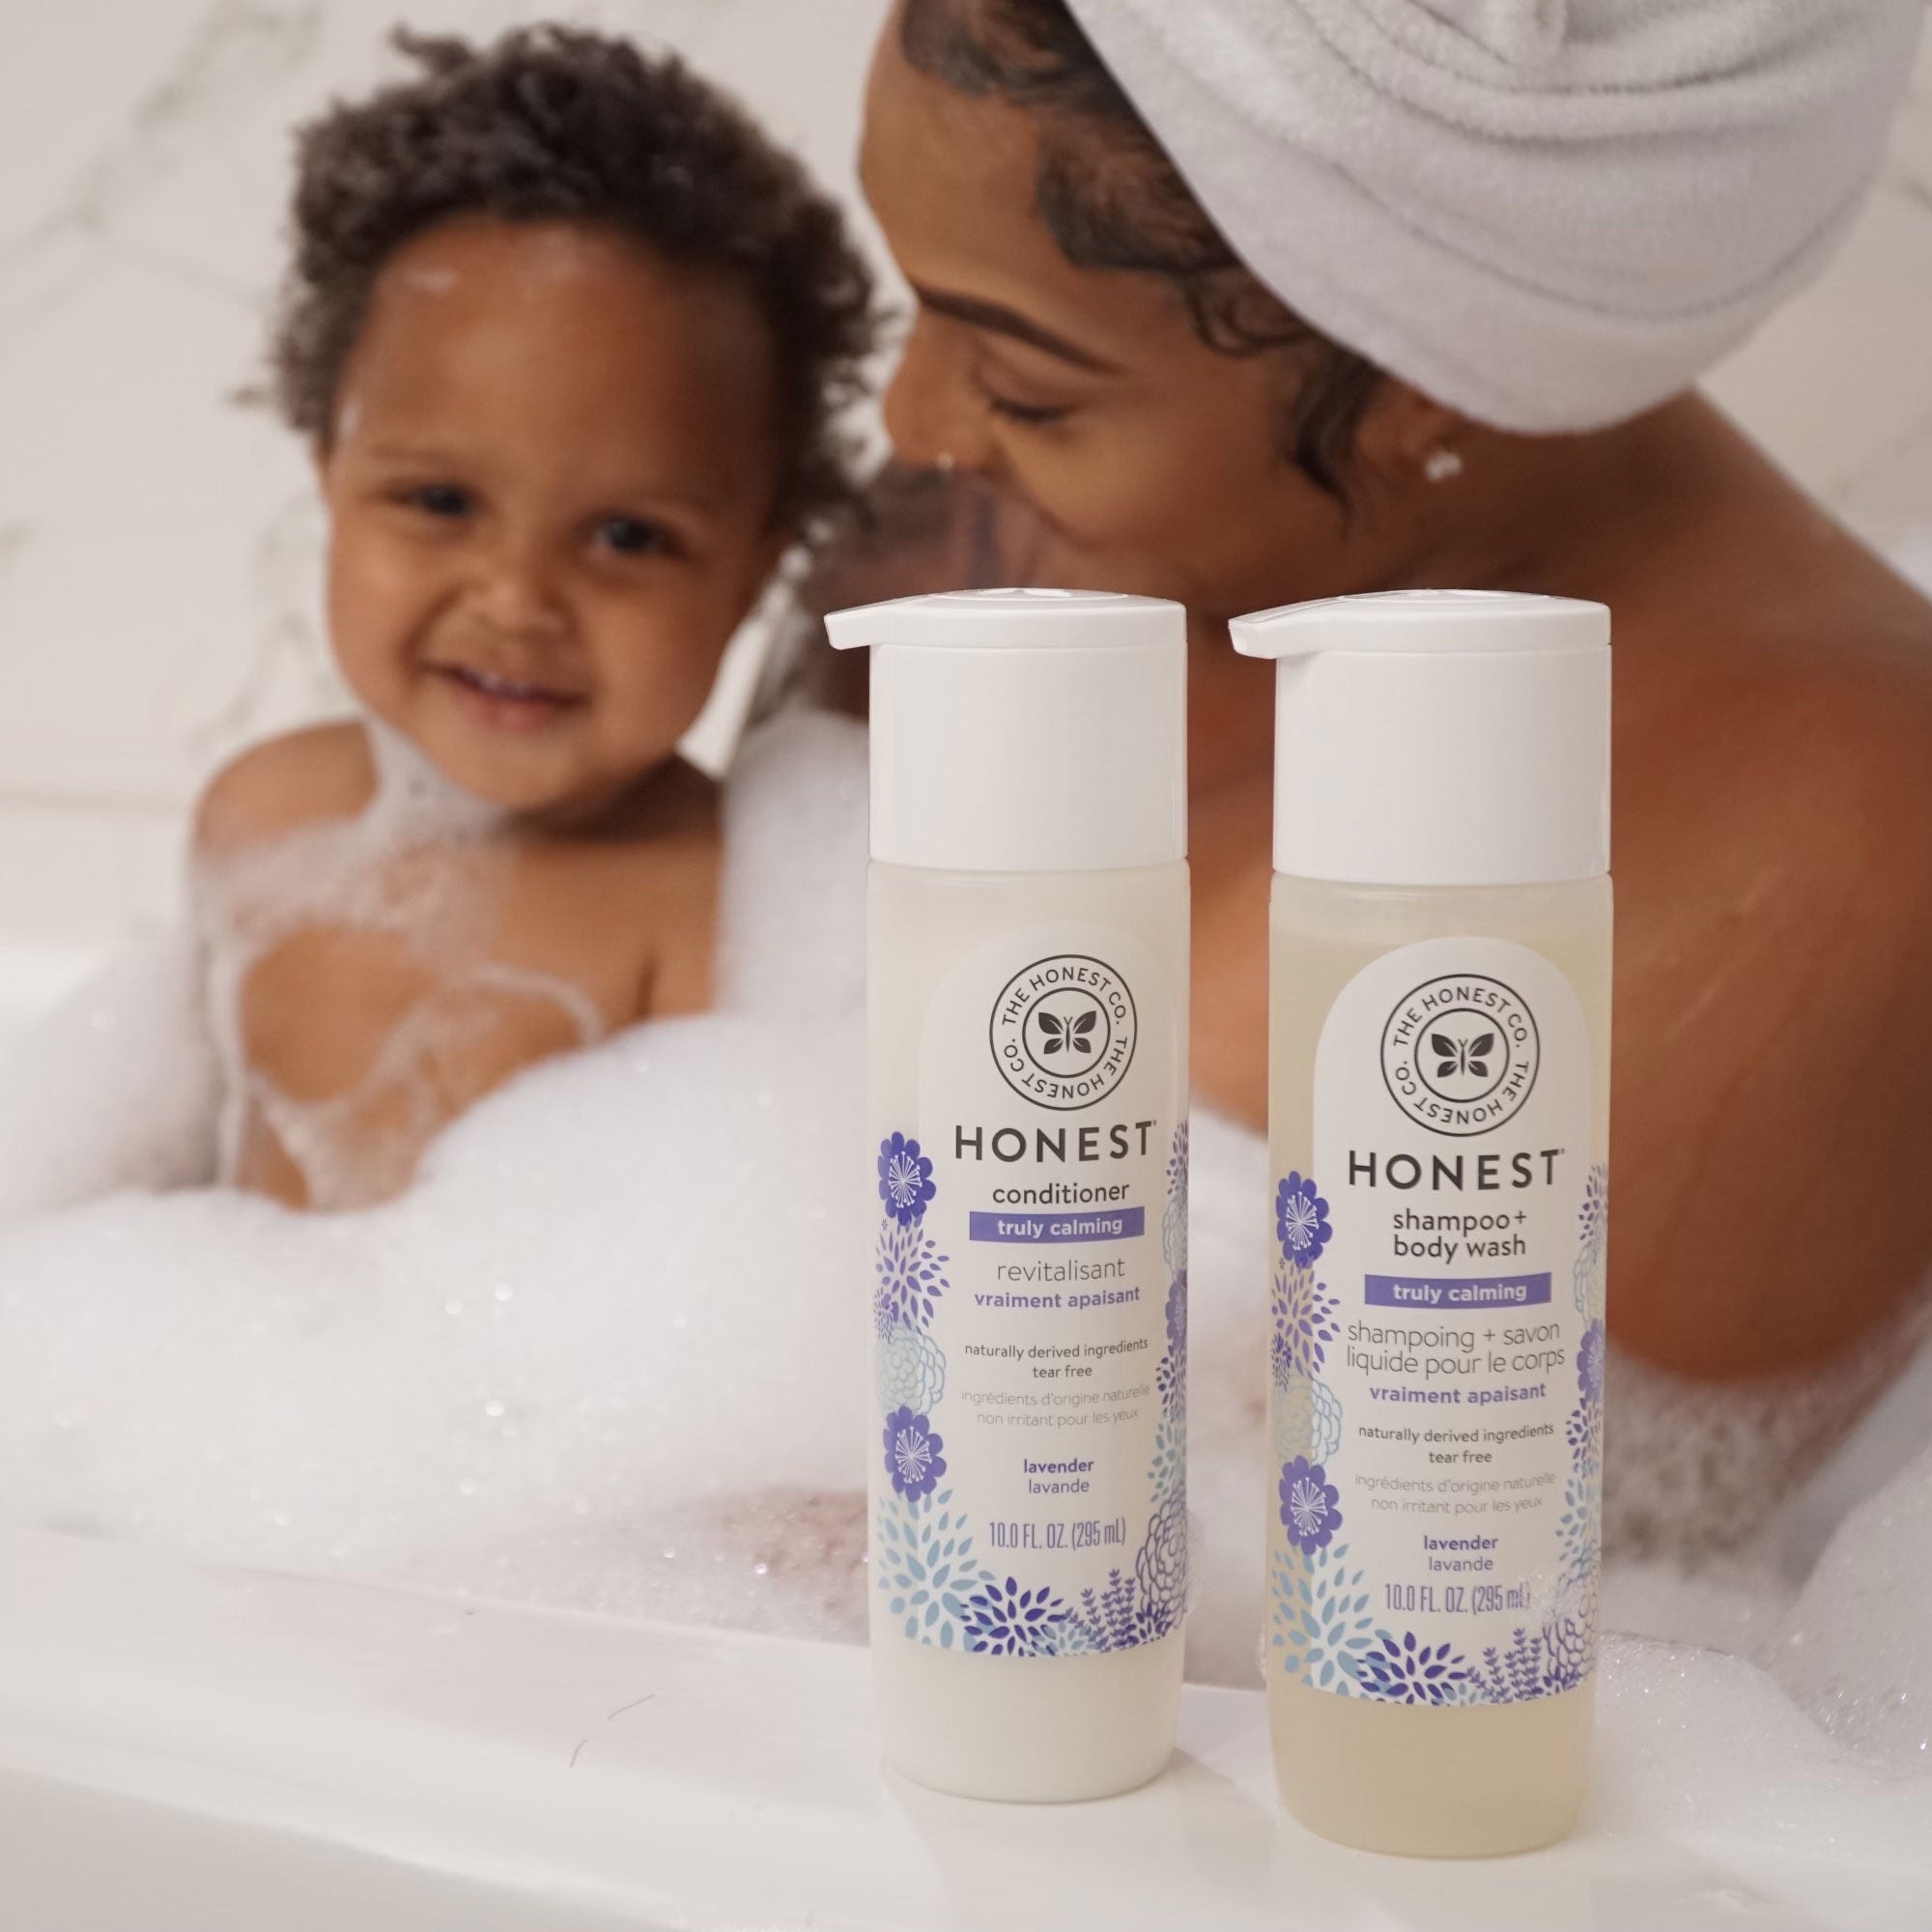 The Honest Co. Conditioner - Truly Calming, Lavender